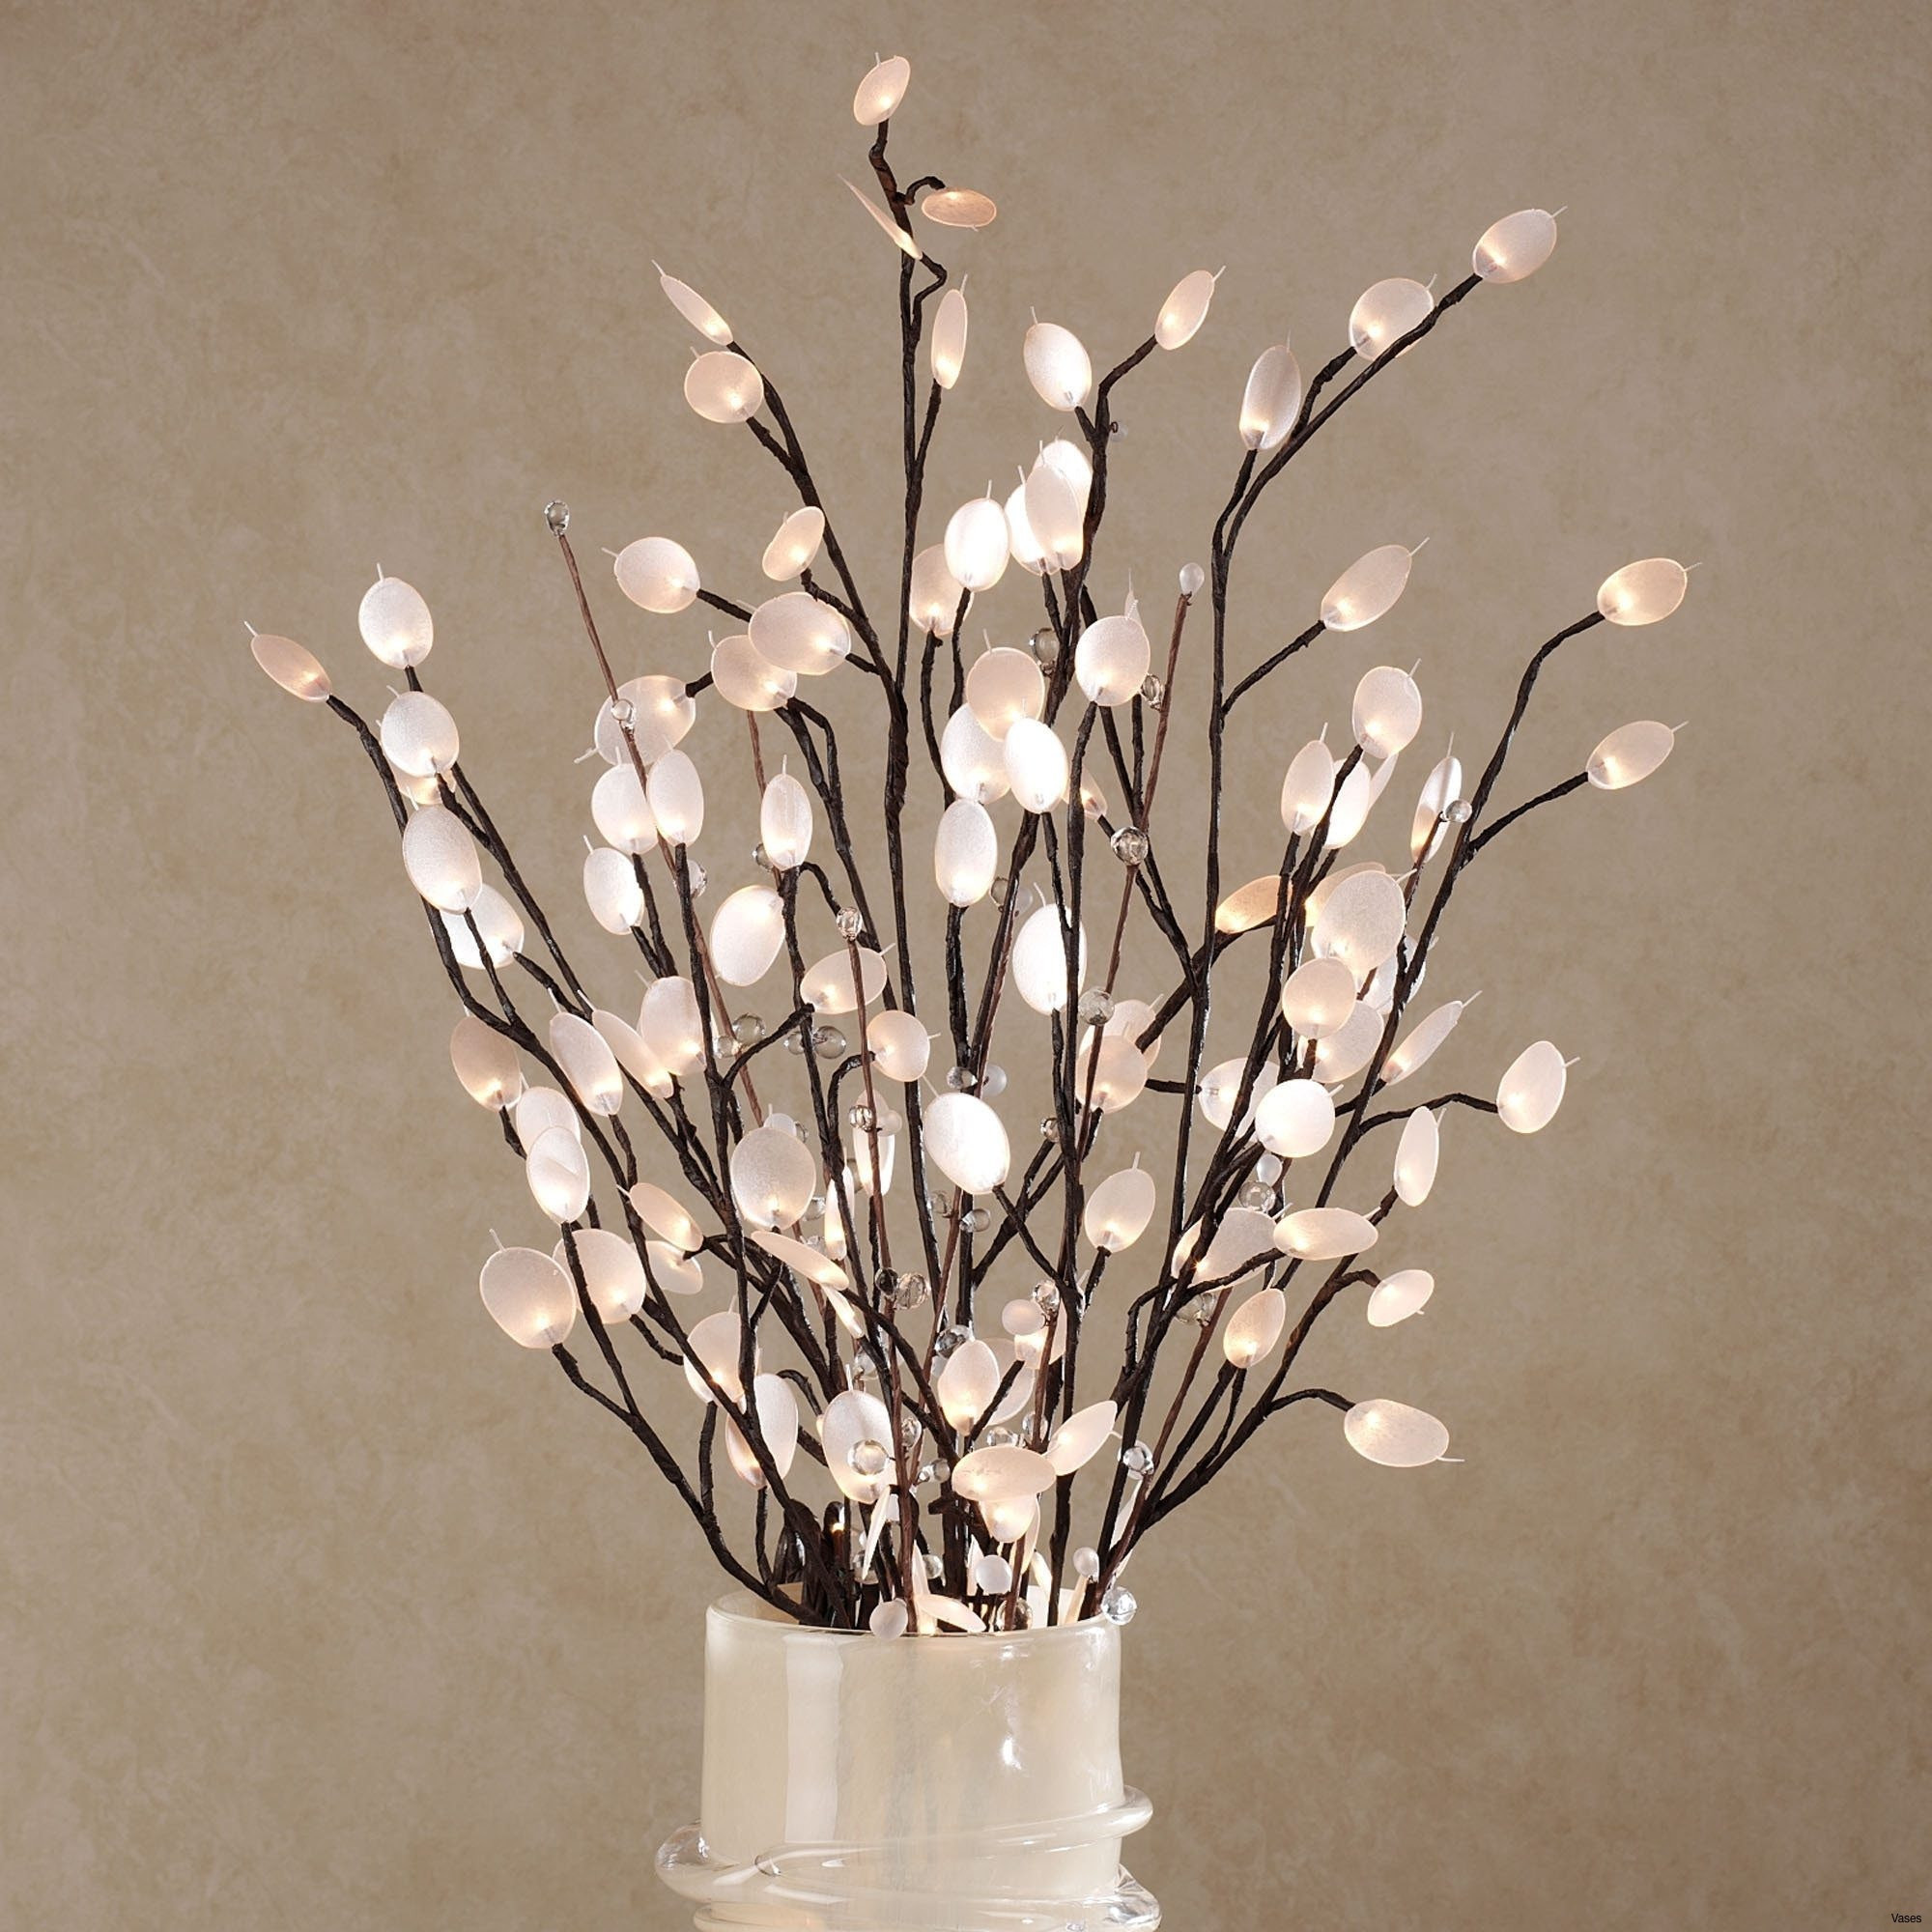 30 Ideal Ac Moore Flower Vases 2024 free download ac moore flower vases of vase with sticks pictures vase with sticksh vases sticks in sticksi in vase with sticks pictures vase with sticksh vases sticks in sticksi 0d lights bamboo design